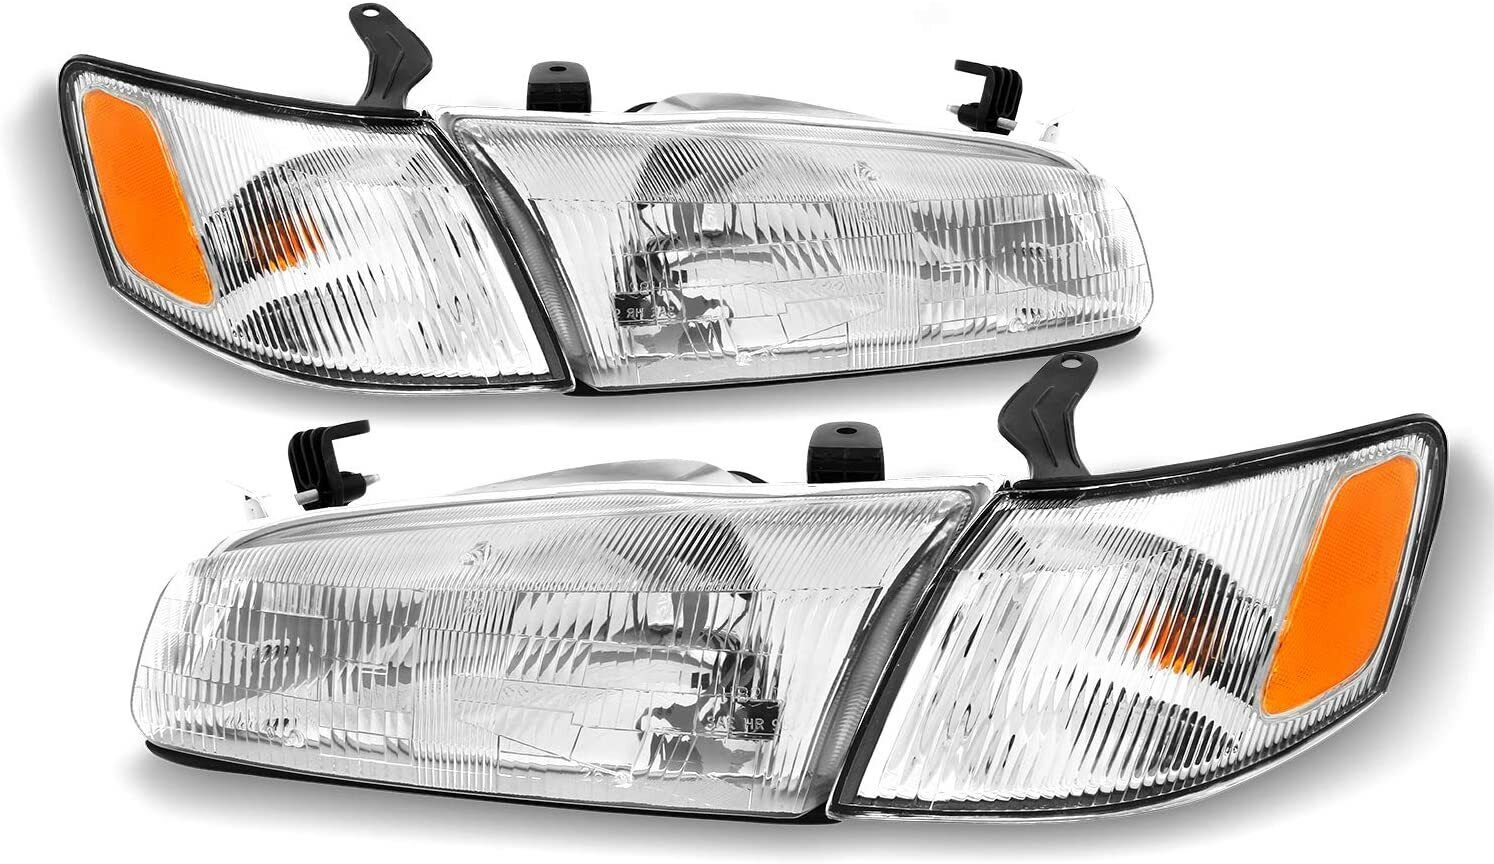 For 1997-1999 Toyota Camry Headlights Headlamps w/Corner Lights Left+Right